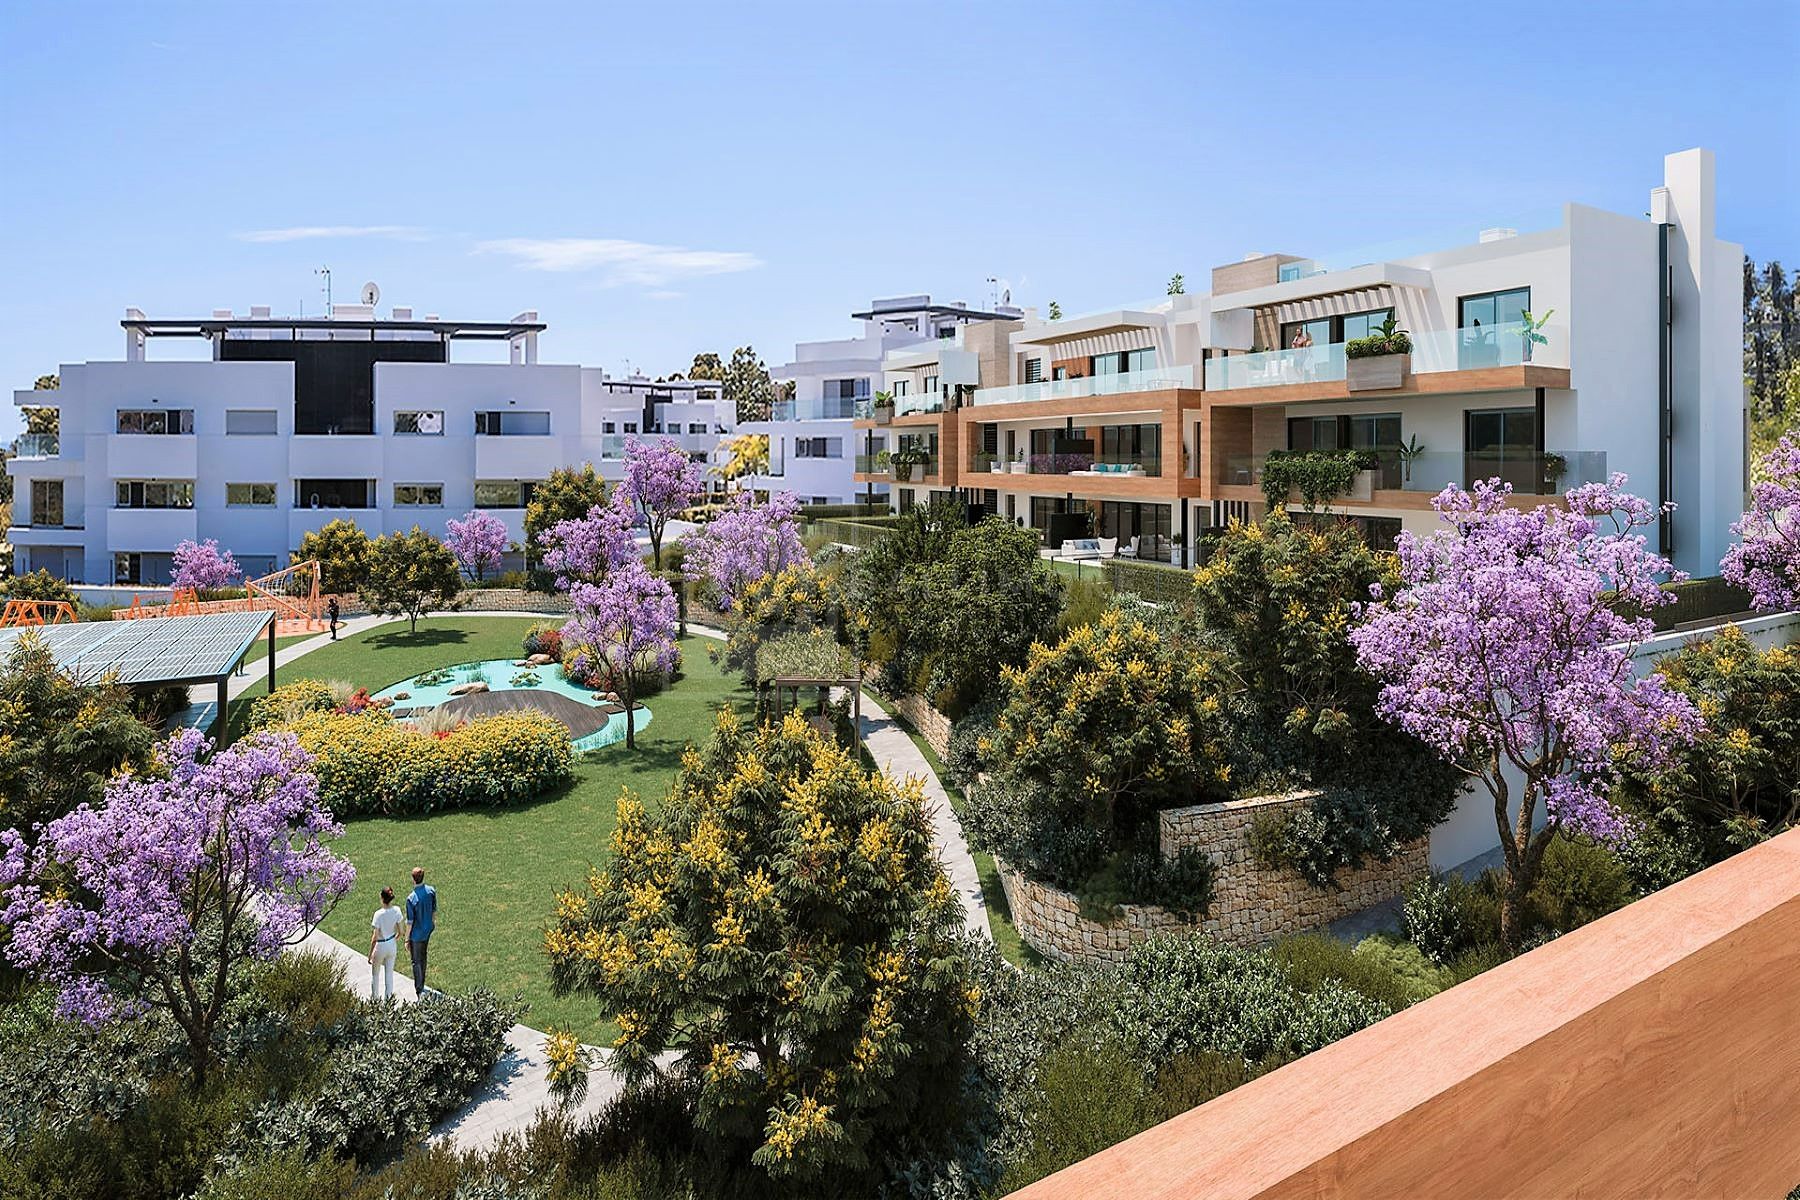 AMAZING VALUE BRAND NEW 2-BEDROOM GROUND FLOOR APARTMENT LOCATED IN ATALAYA, NEW GOLDEN MILE